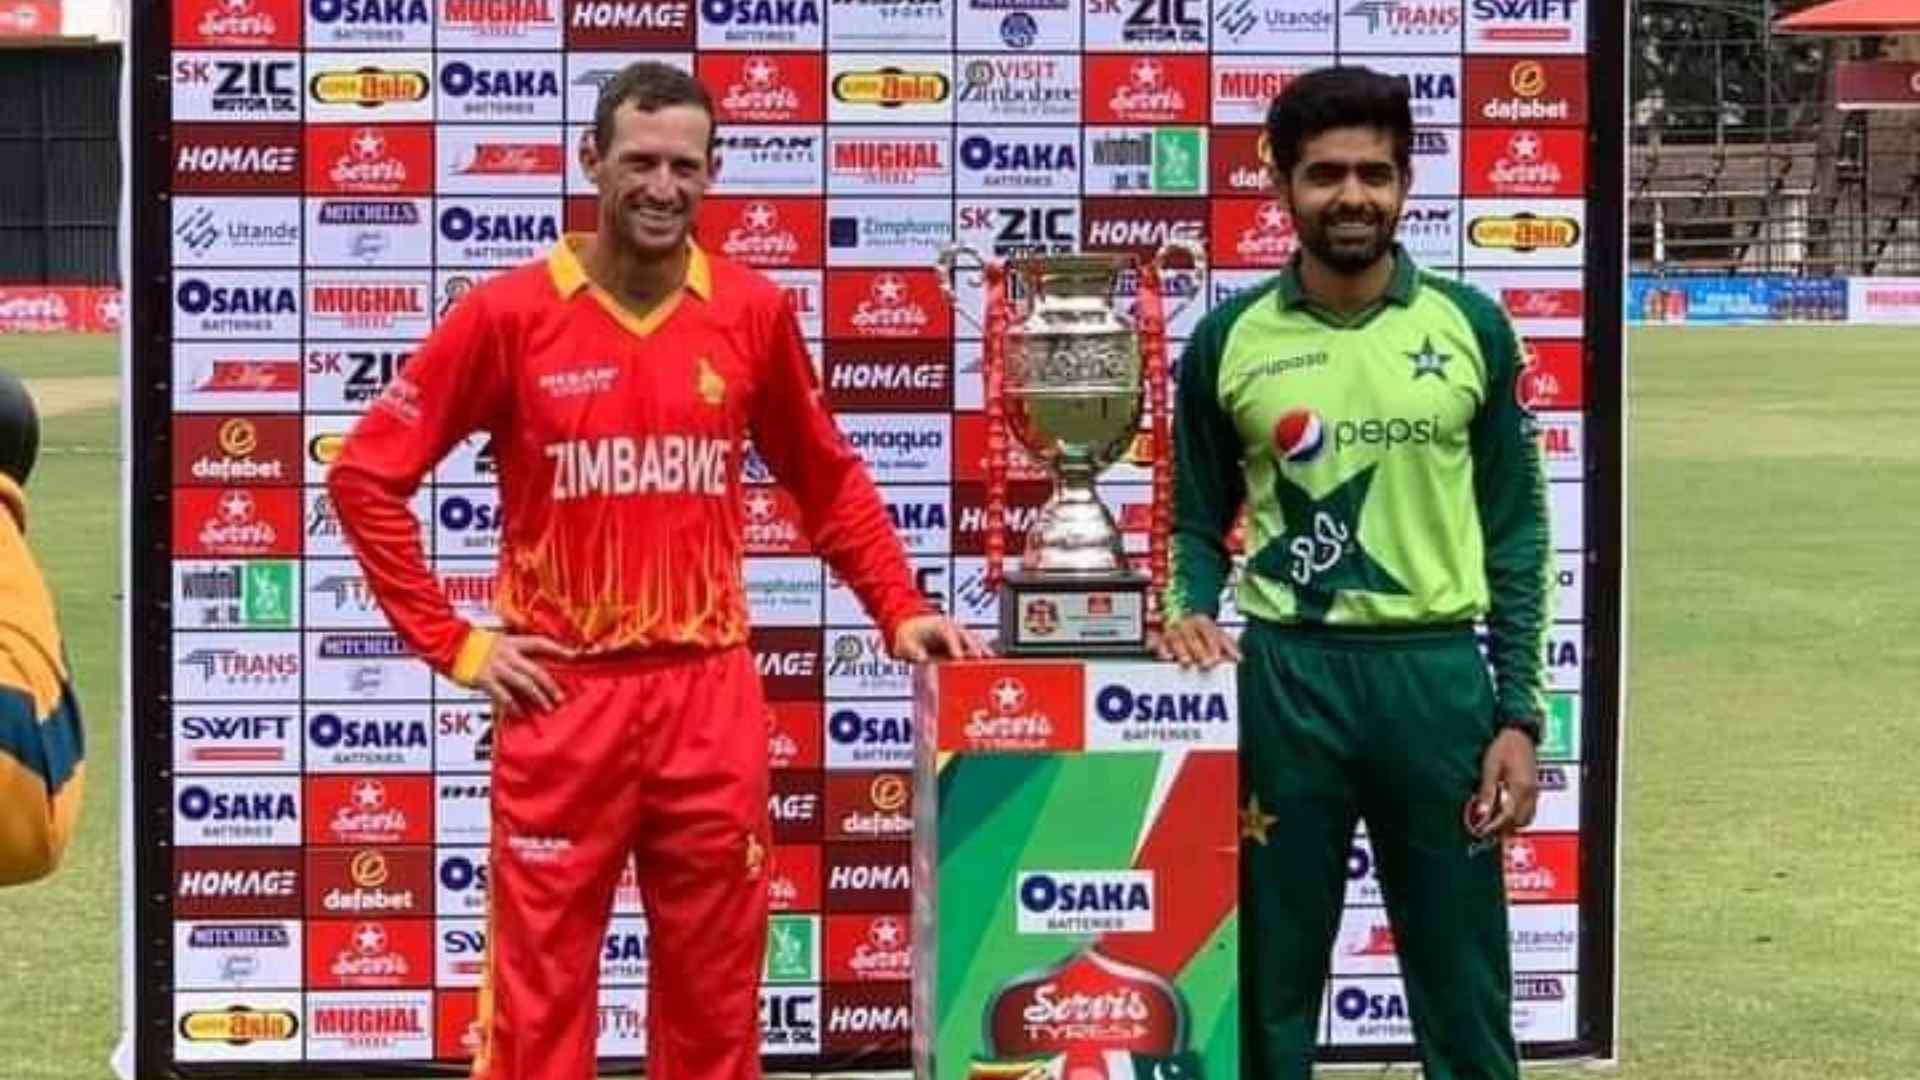 Pakistan have been trolled for playing Zimbabwe on a frequent basis.